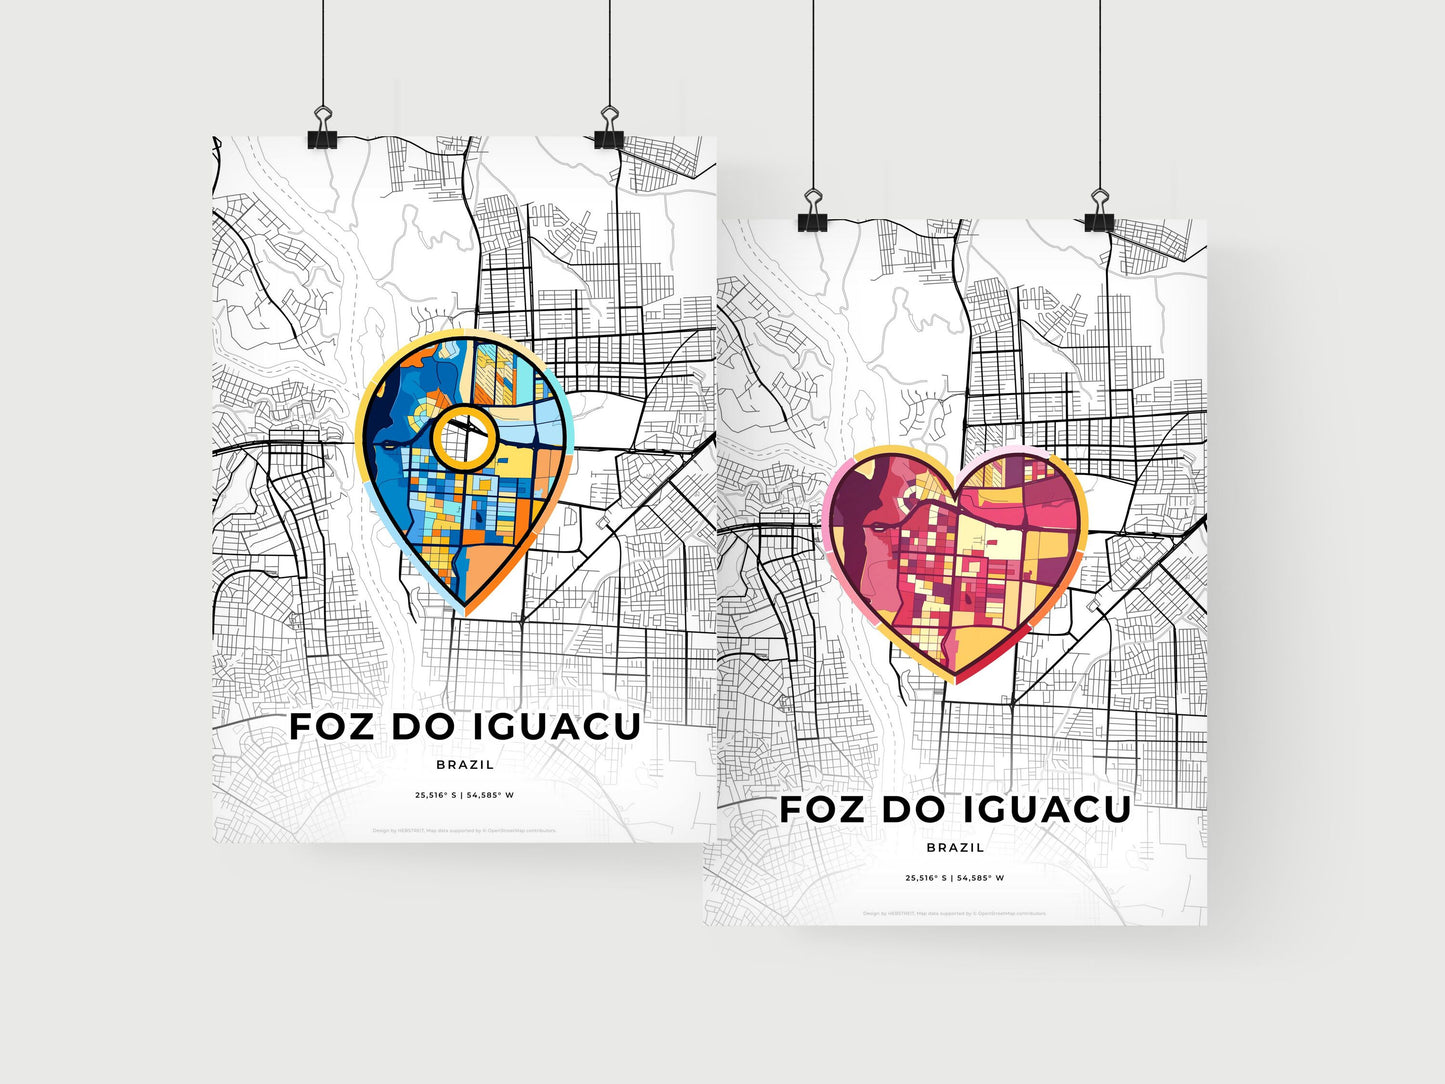 FOZ DO IGUACU BRAZIL minimal art map with a colorful icon. Where it all began, Couple map gift.